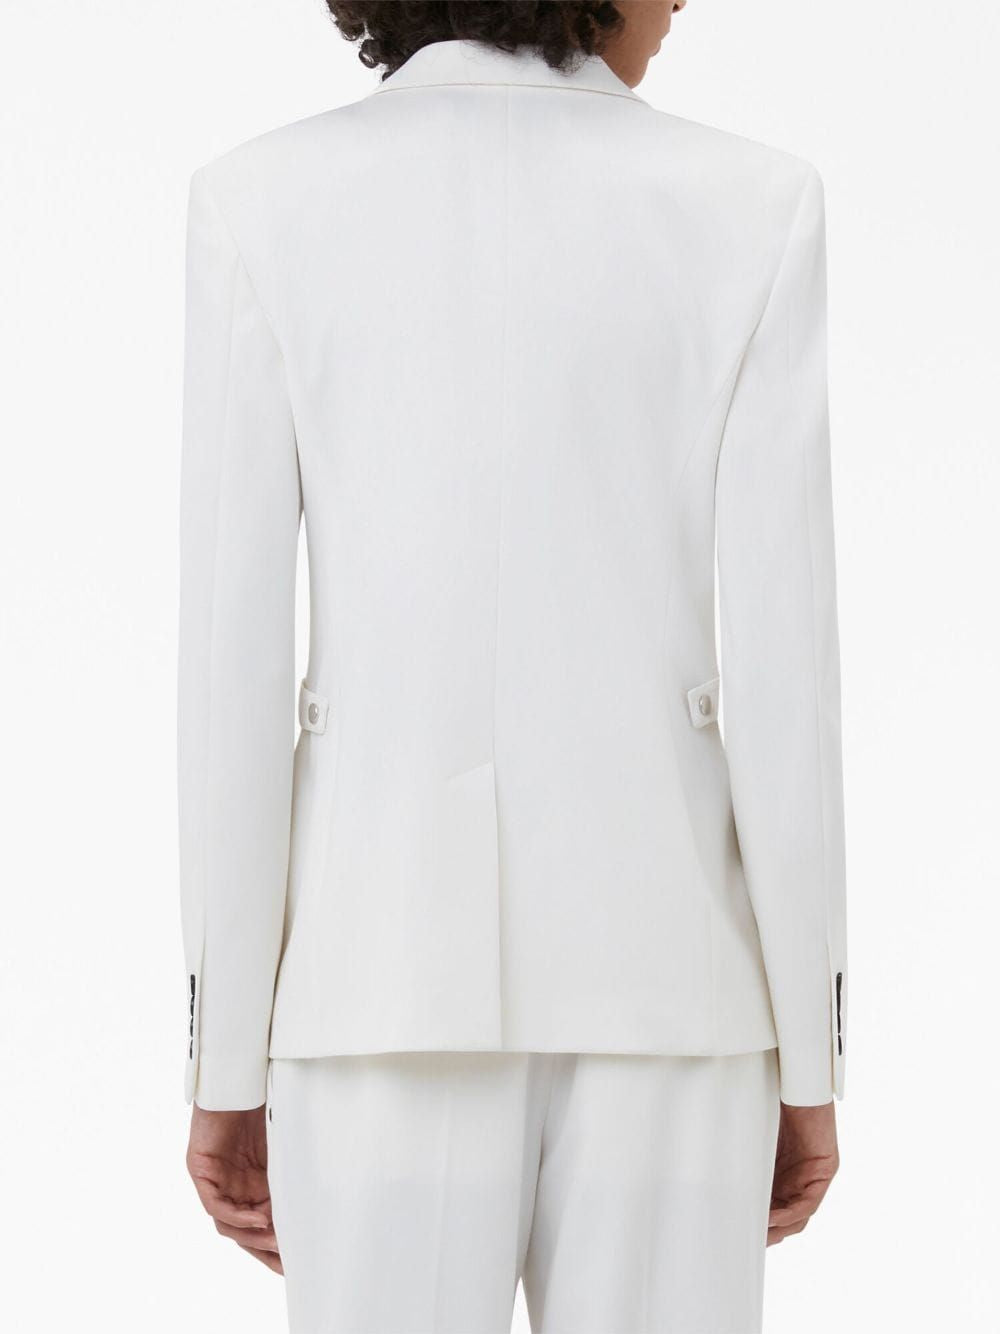 JW ANDERSON Sophisticated Optical White Stretch Blazer with Notched Lapels for Women